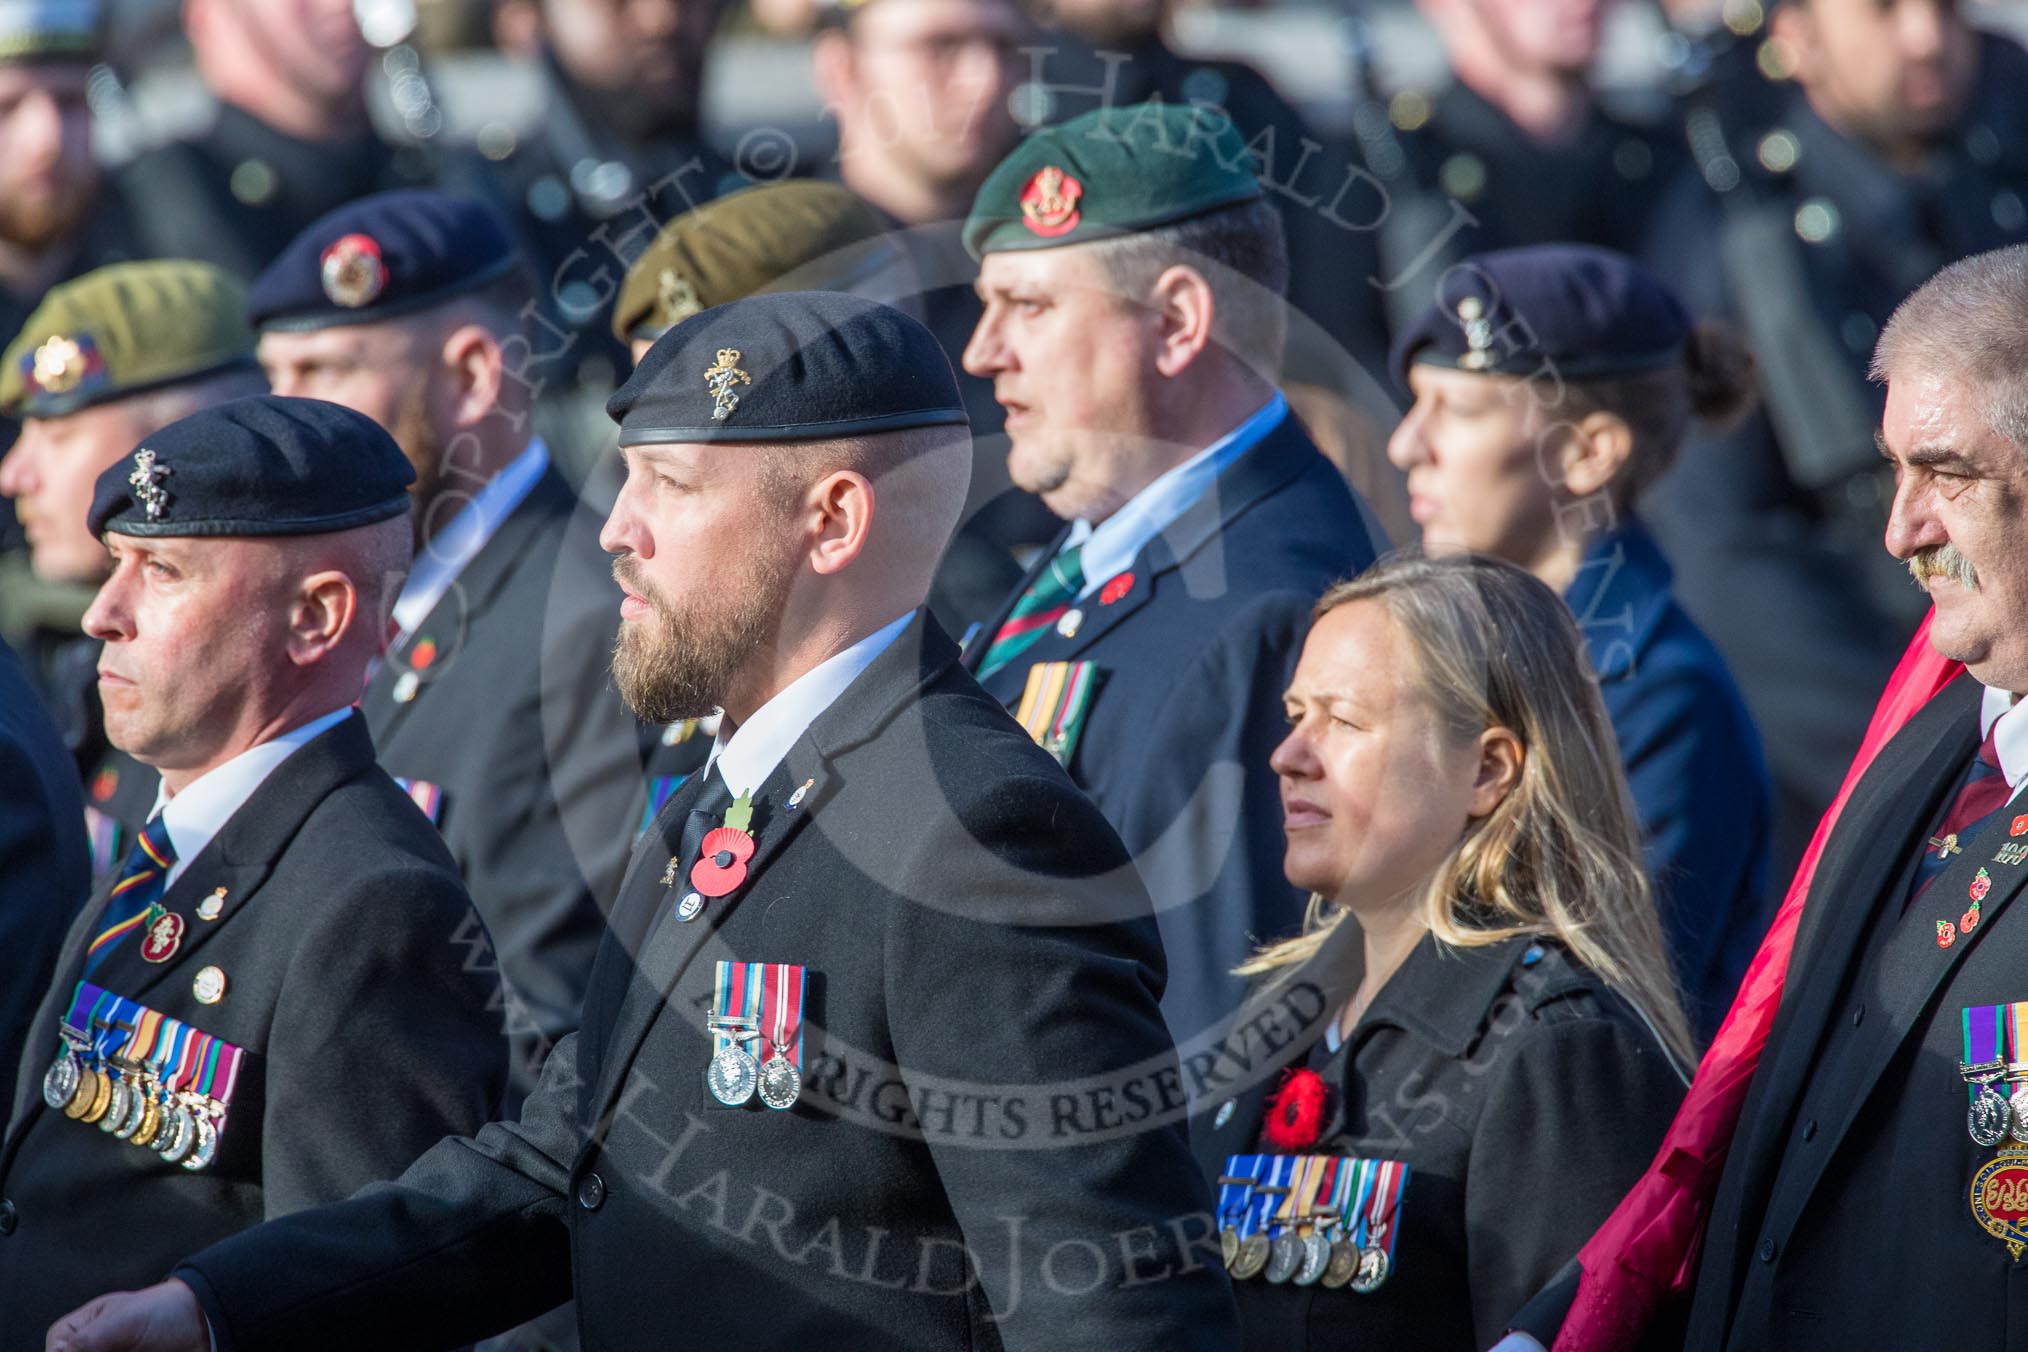 Help for Heroes (Group F4, 100 members) during the Royal British Legion March Past on Remembrance Sunday at the Cenotaph, Whitehall, Westminster, London, 11 November 2018, 11:50.